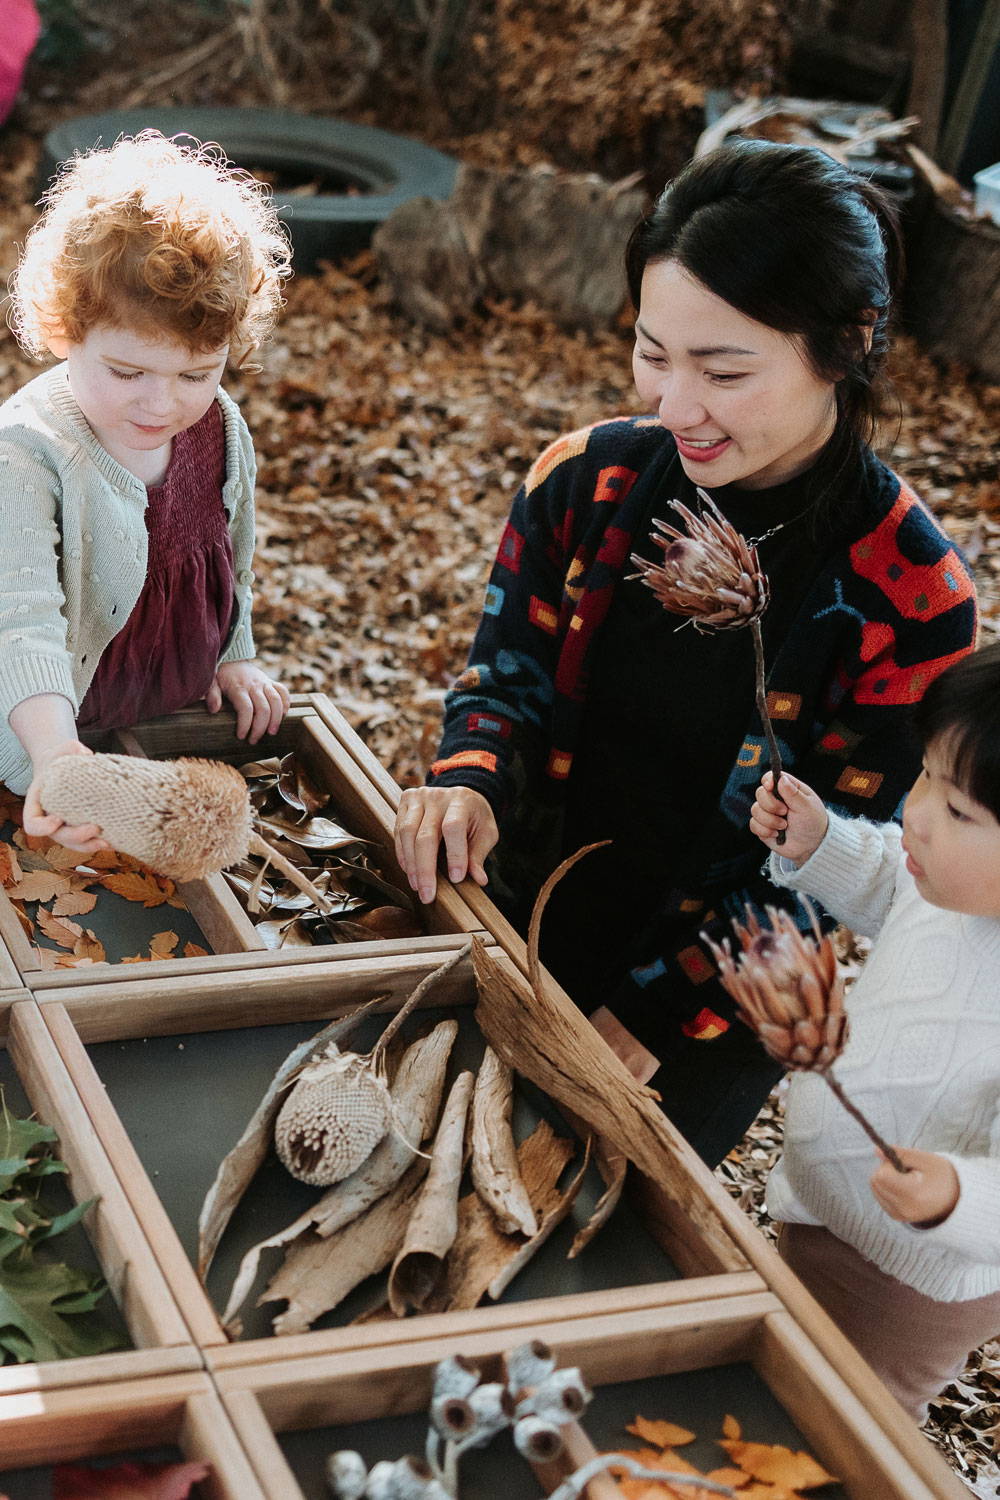 Children Holding Natural Elements from the Sensory Play Table